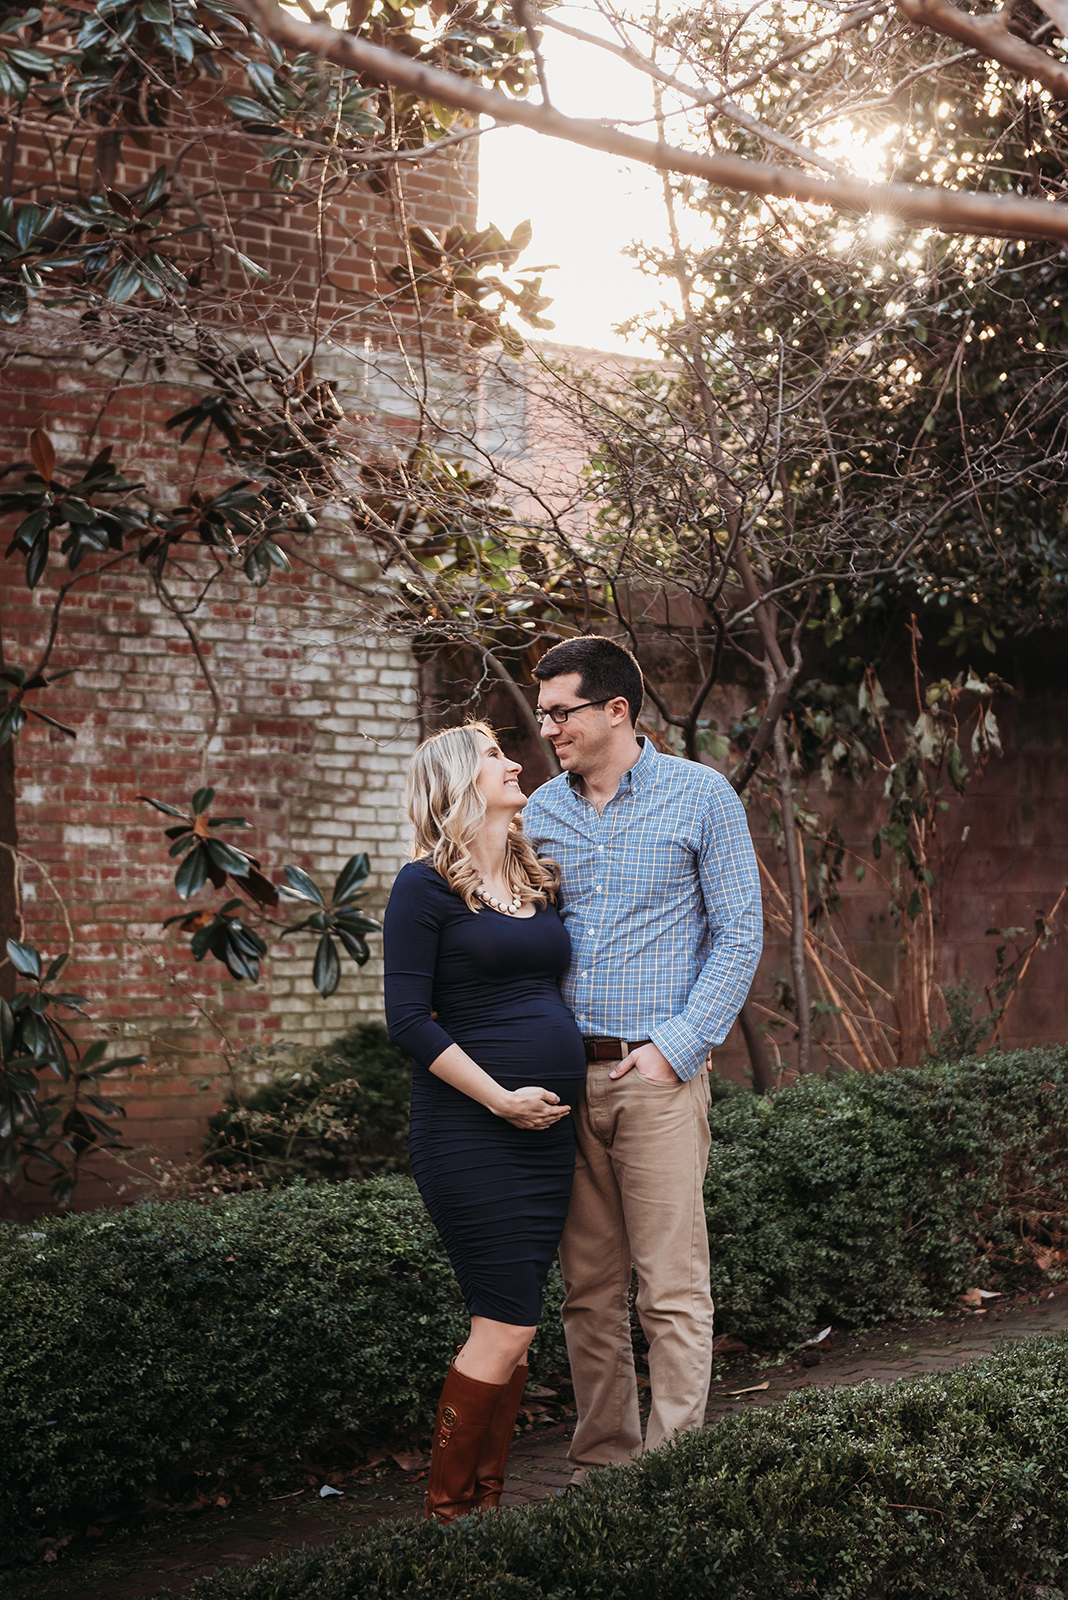 Alexandria VA maternity photo shoot of couple standing in park looking at each other.jpg